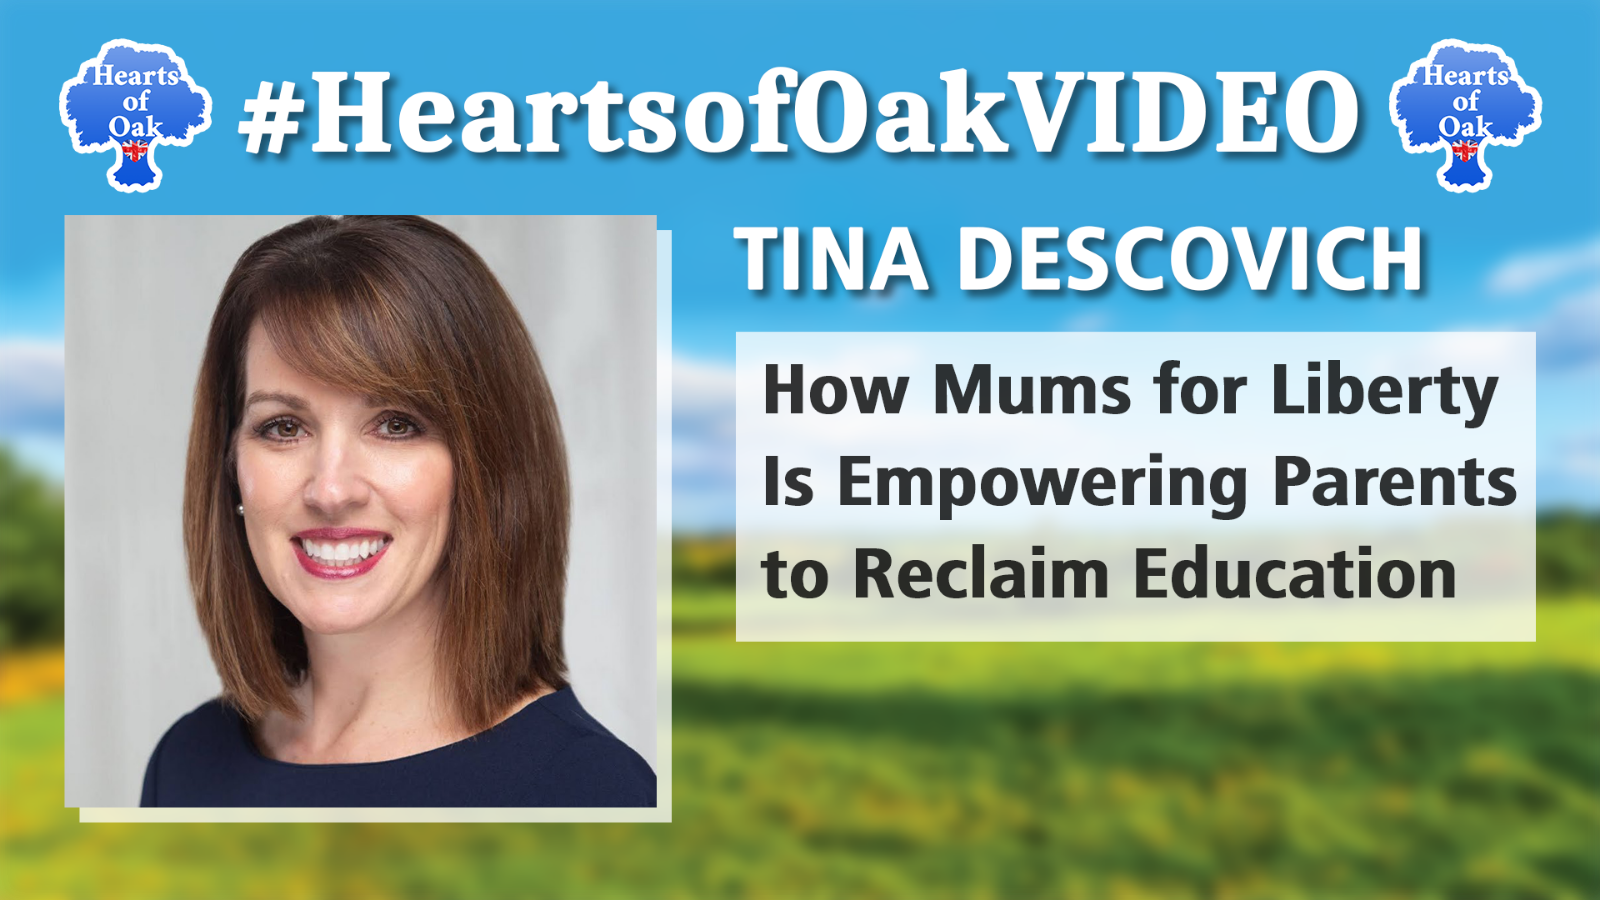 Tina Descovich - How Moms for Liberty is Empowering Parents to Reclaim Education